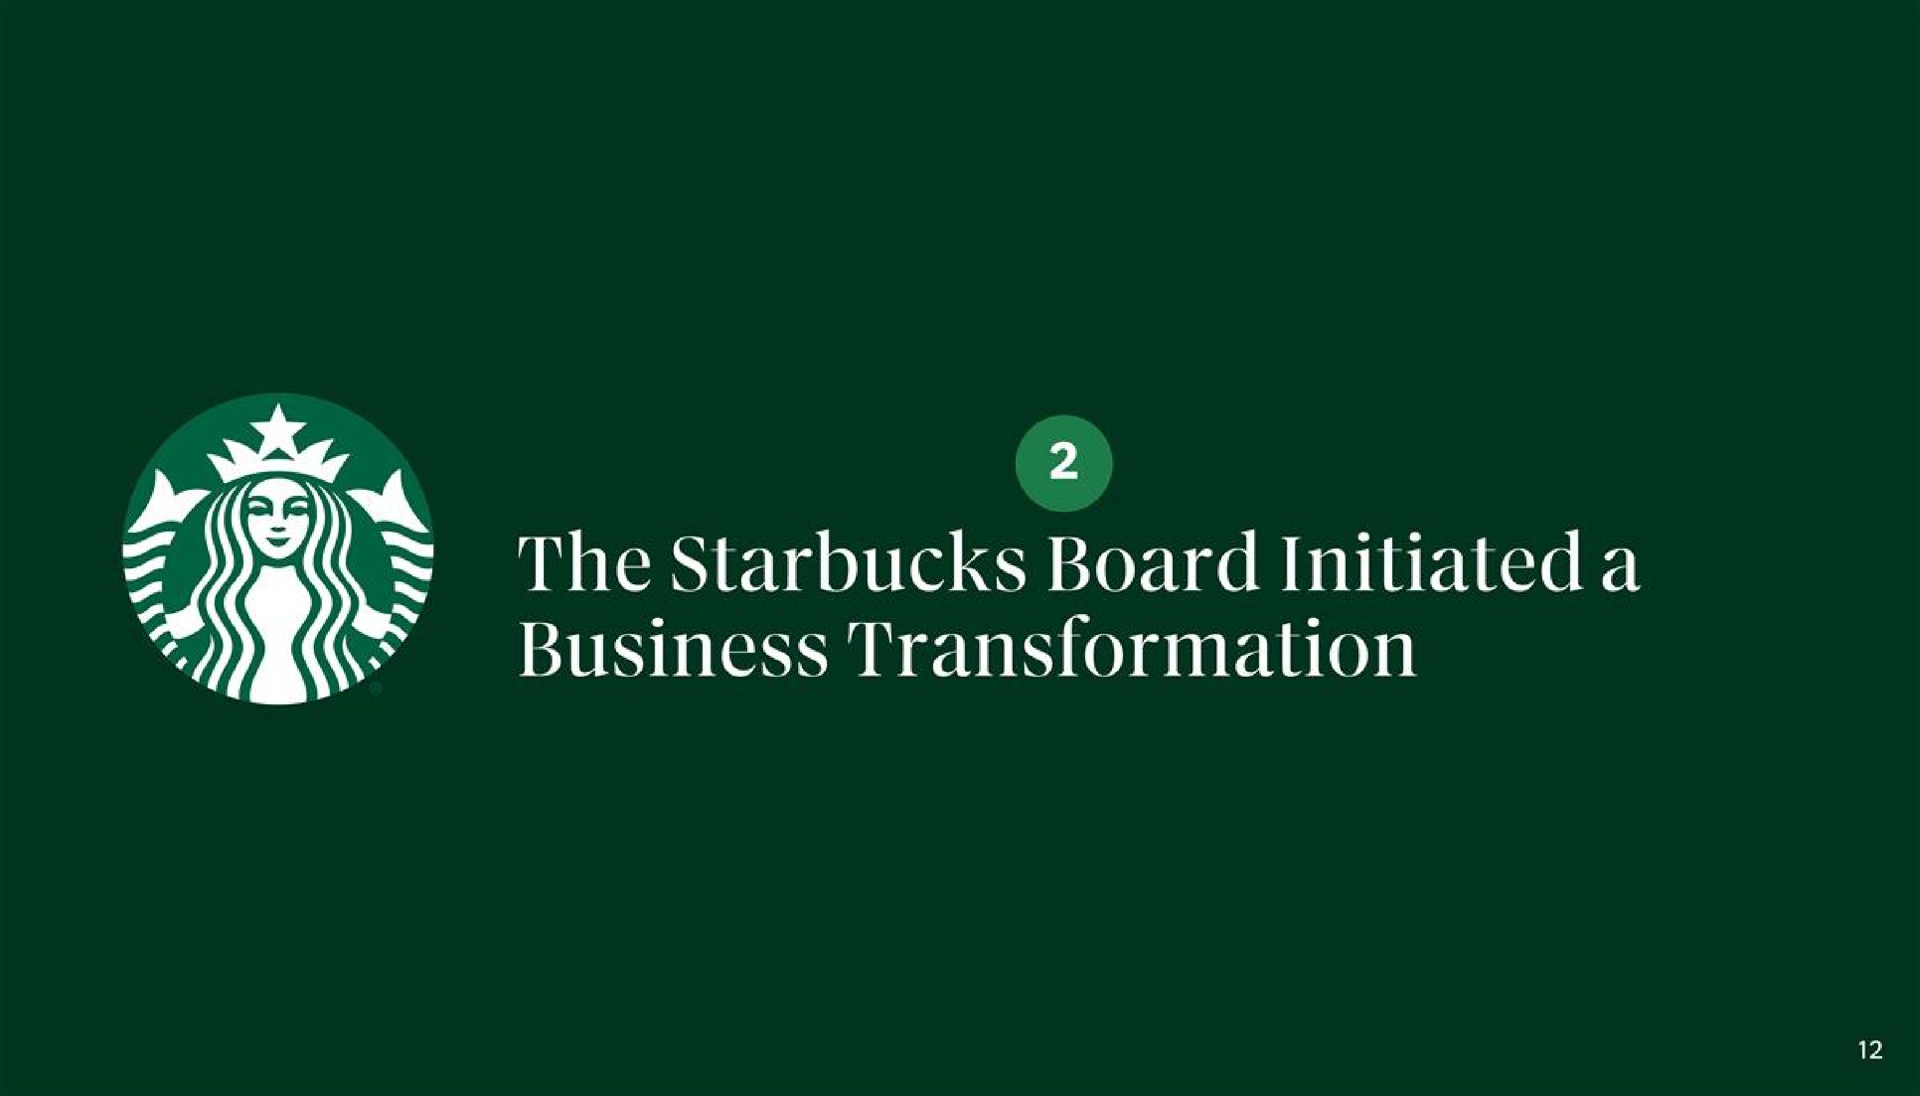 a a the board initiated a business transformation | Starbucks